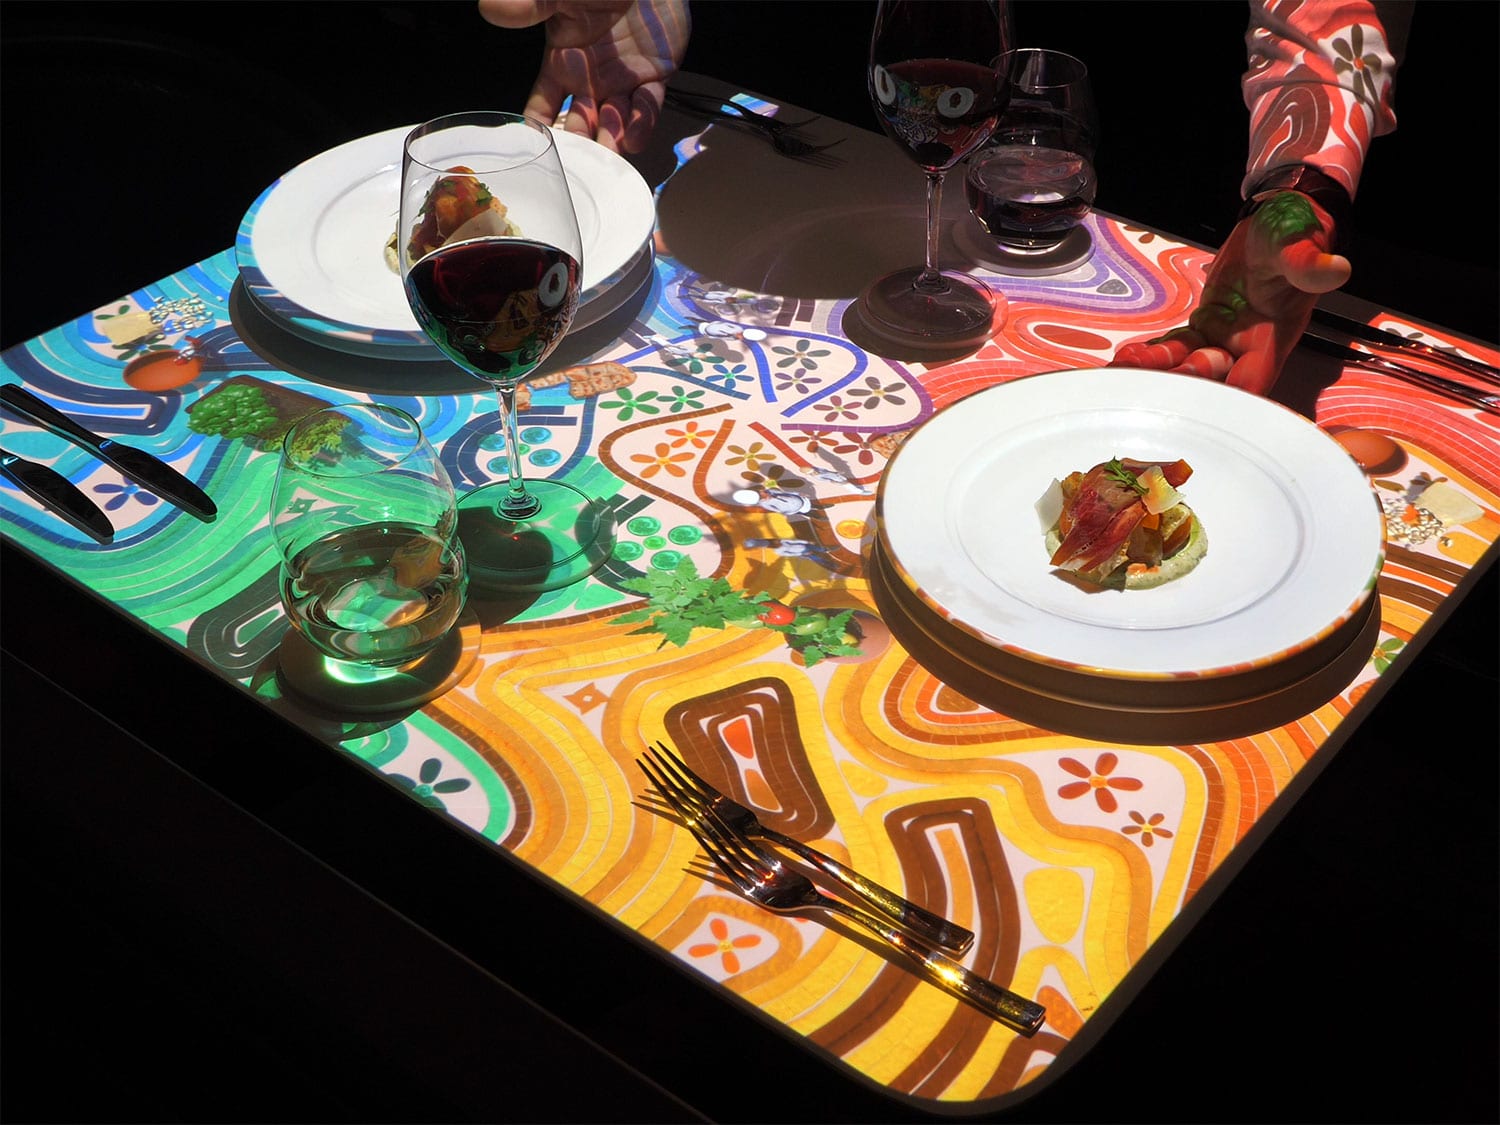 The interactive Le Petit dining experience on the Celebrity Beyond cruise ship from Celebrity Cruises.